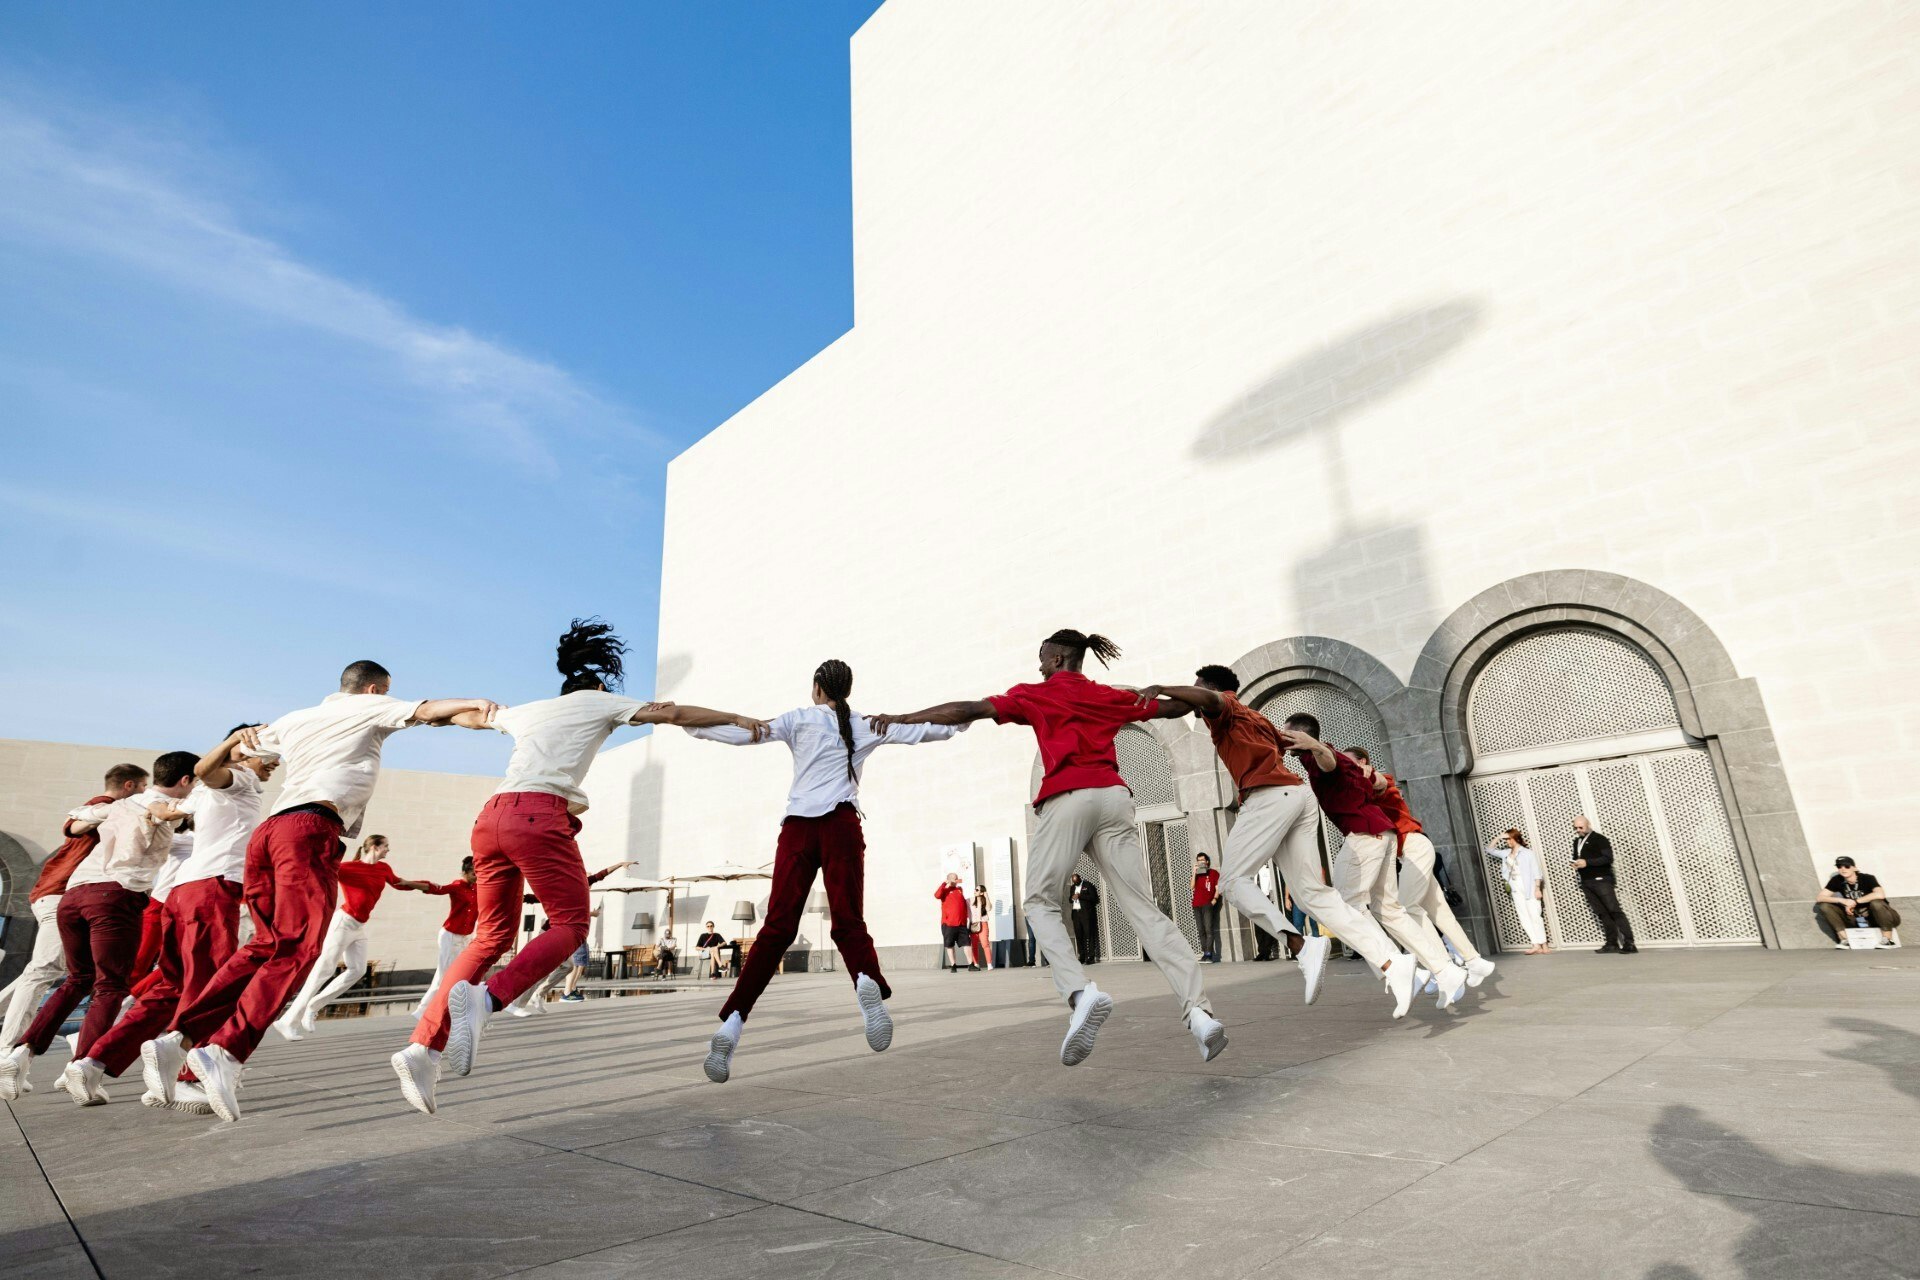 A photograph of a group of people dancing in a circle.